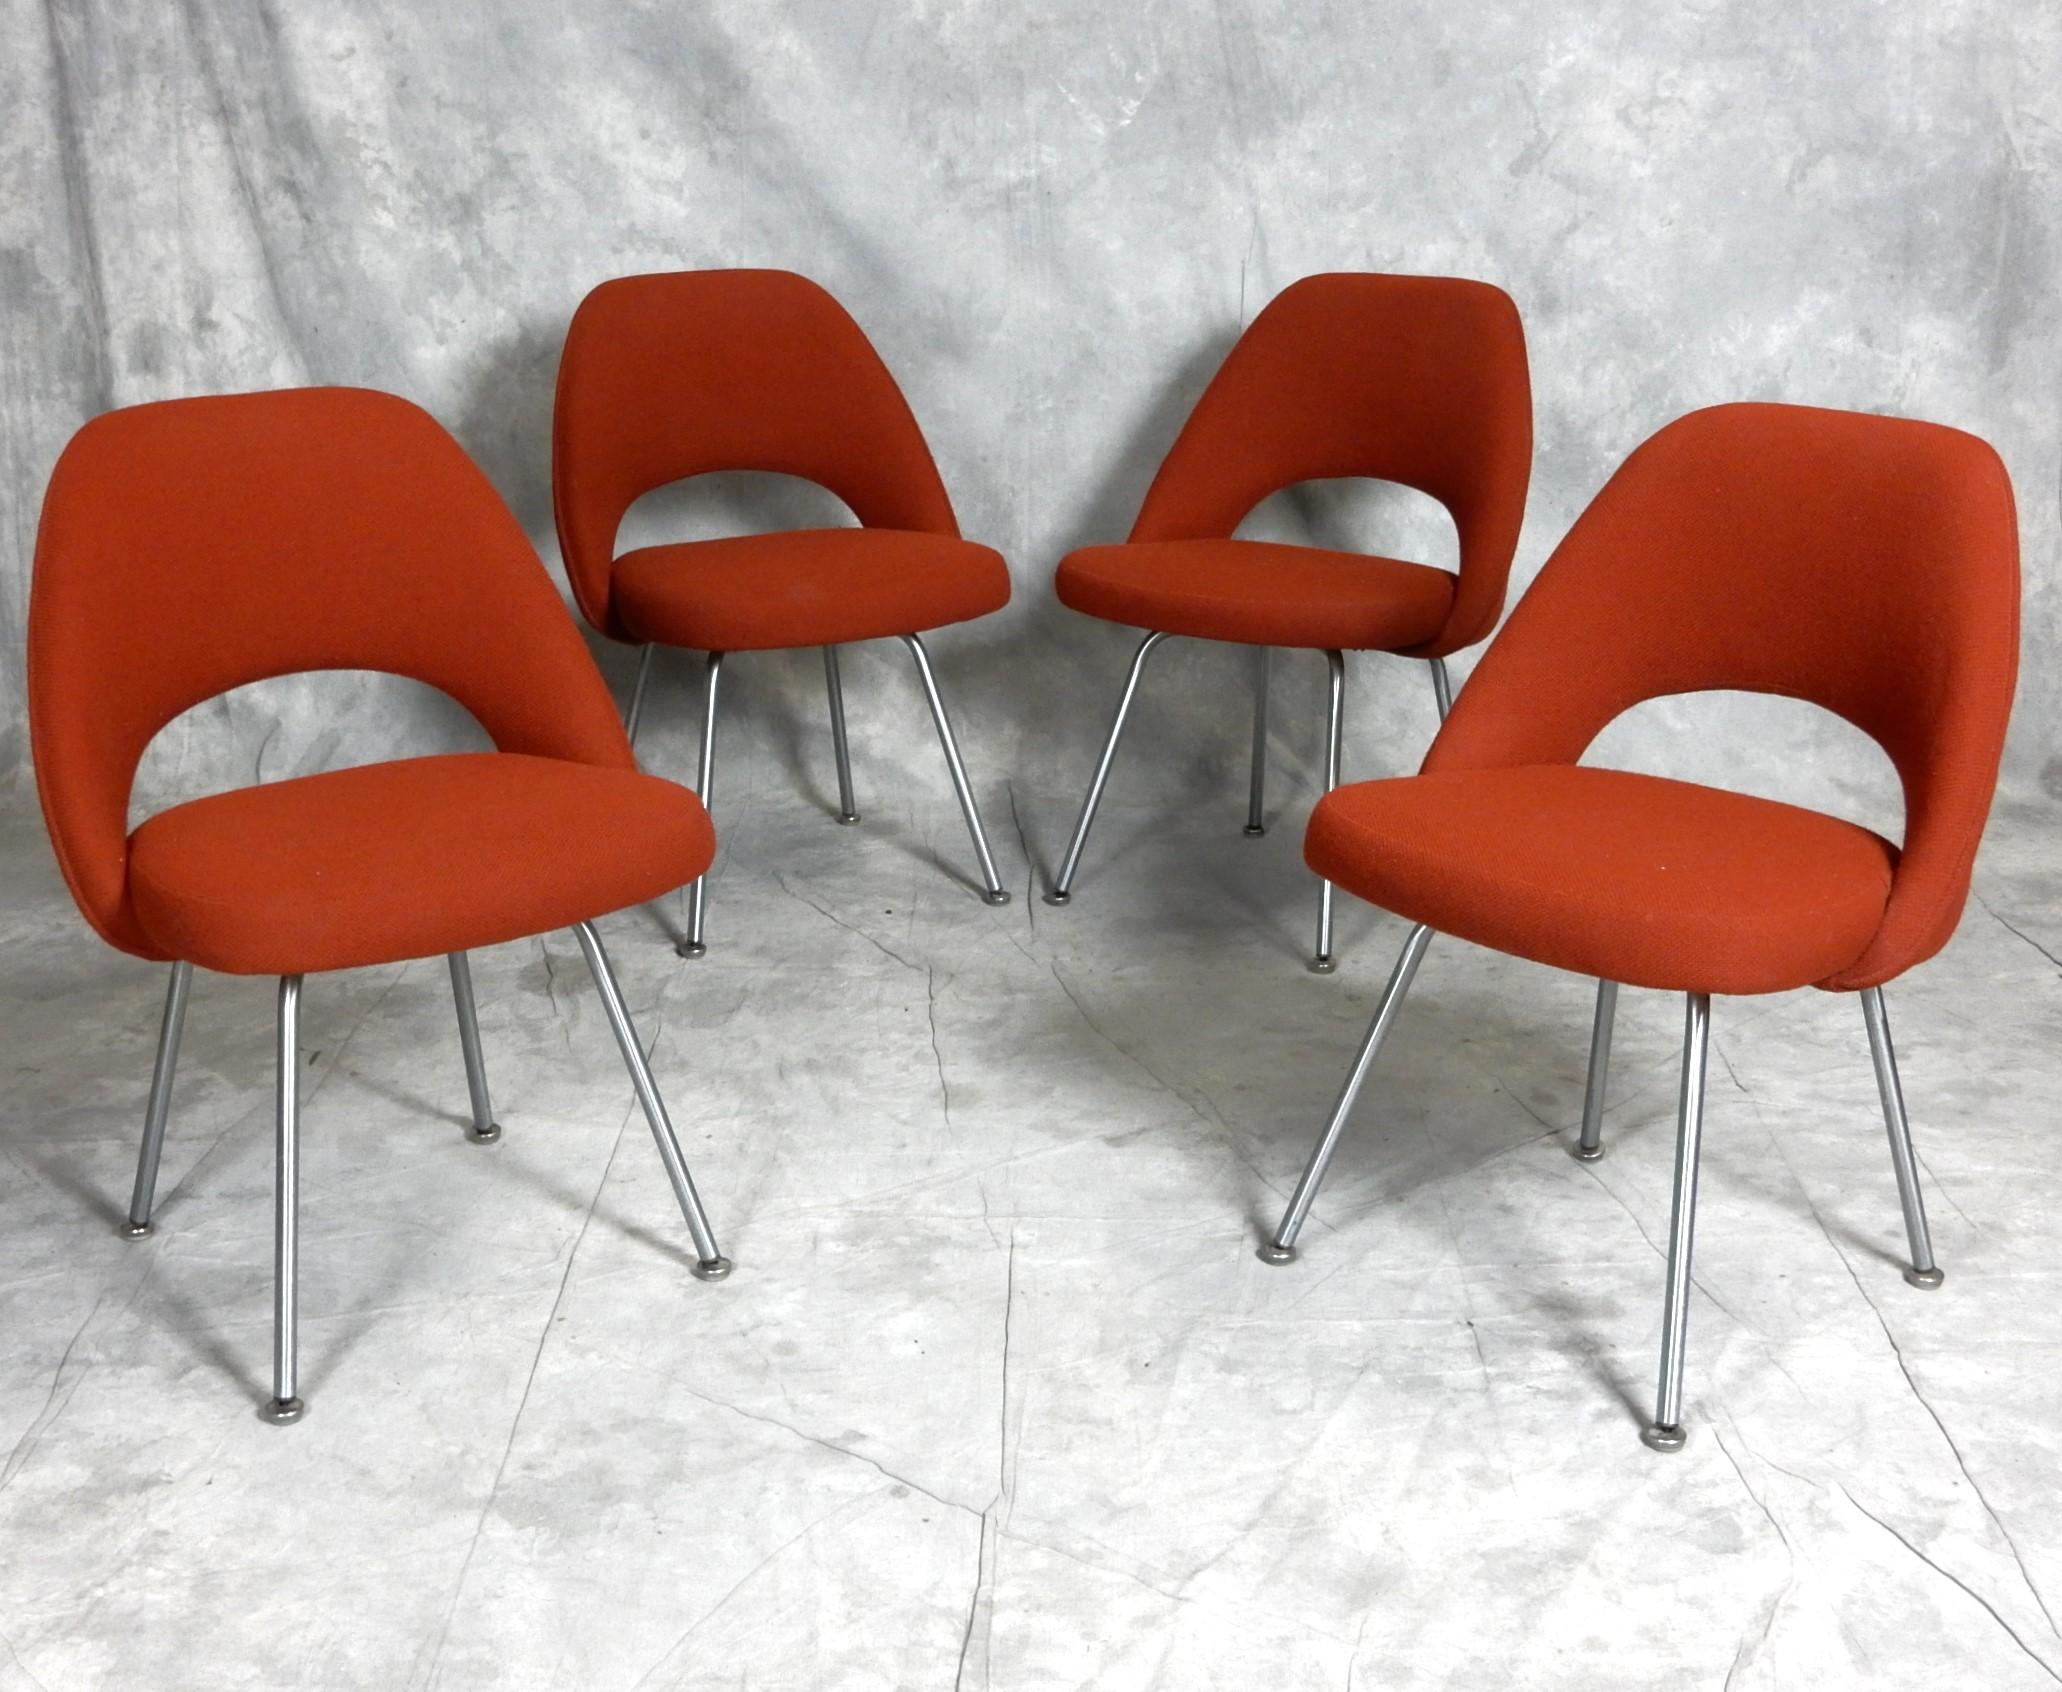 20th Century Mid-Century Saarinen for Knoll Executive Armless Chairs. set of 4, dated 1963 For Sale